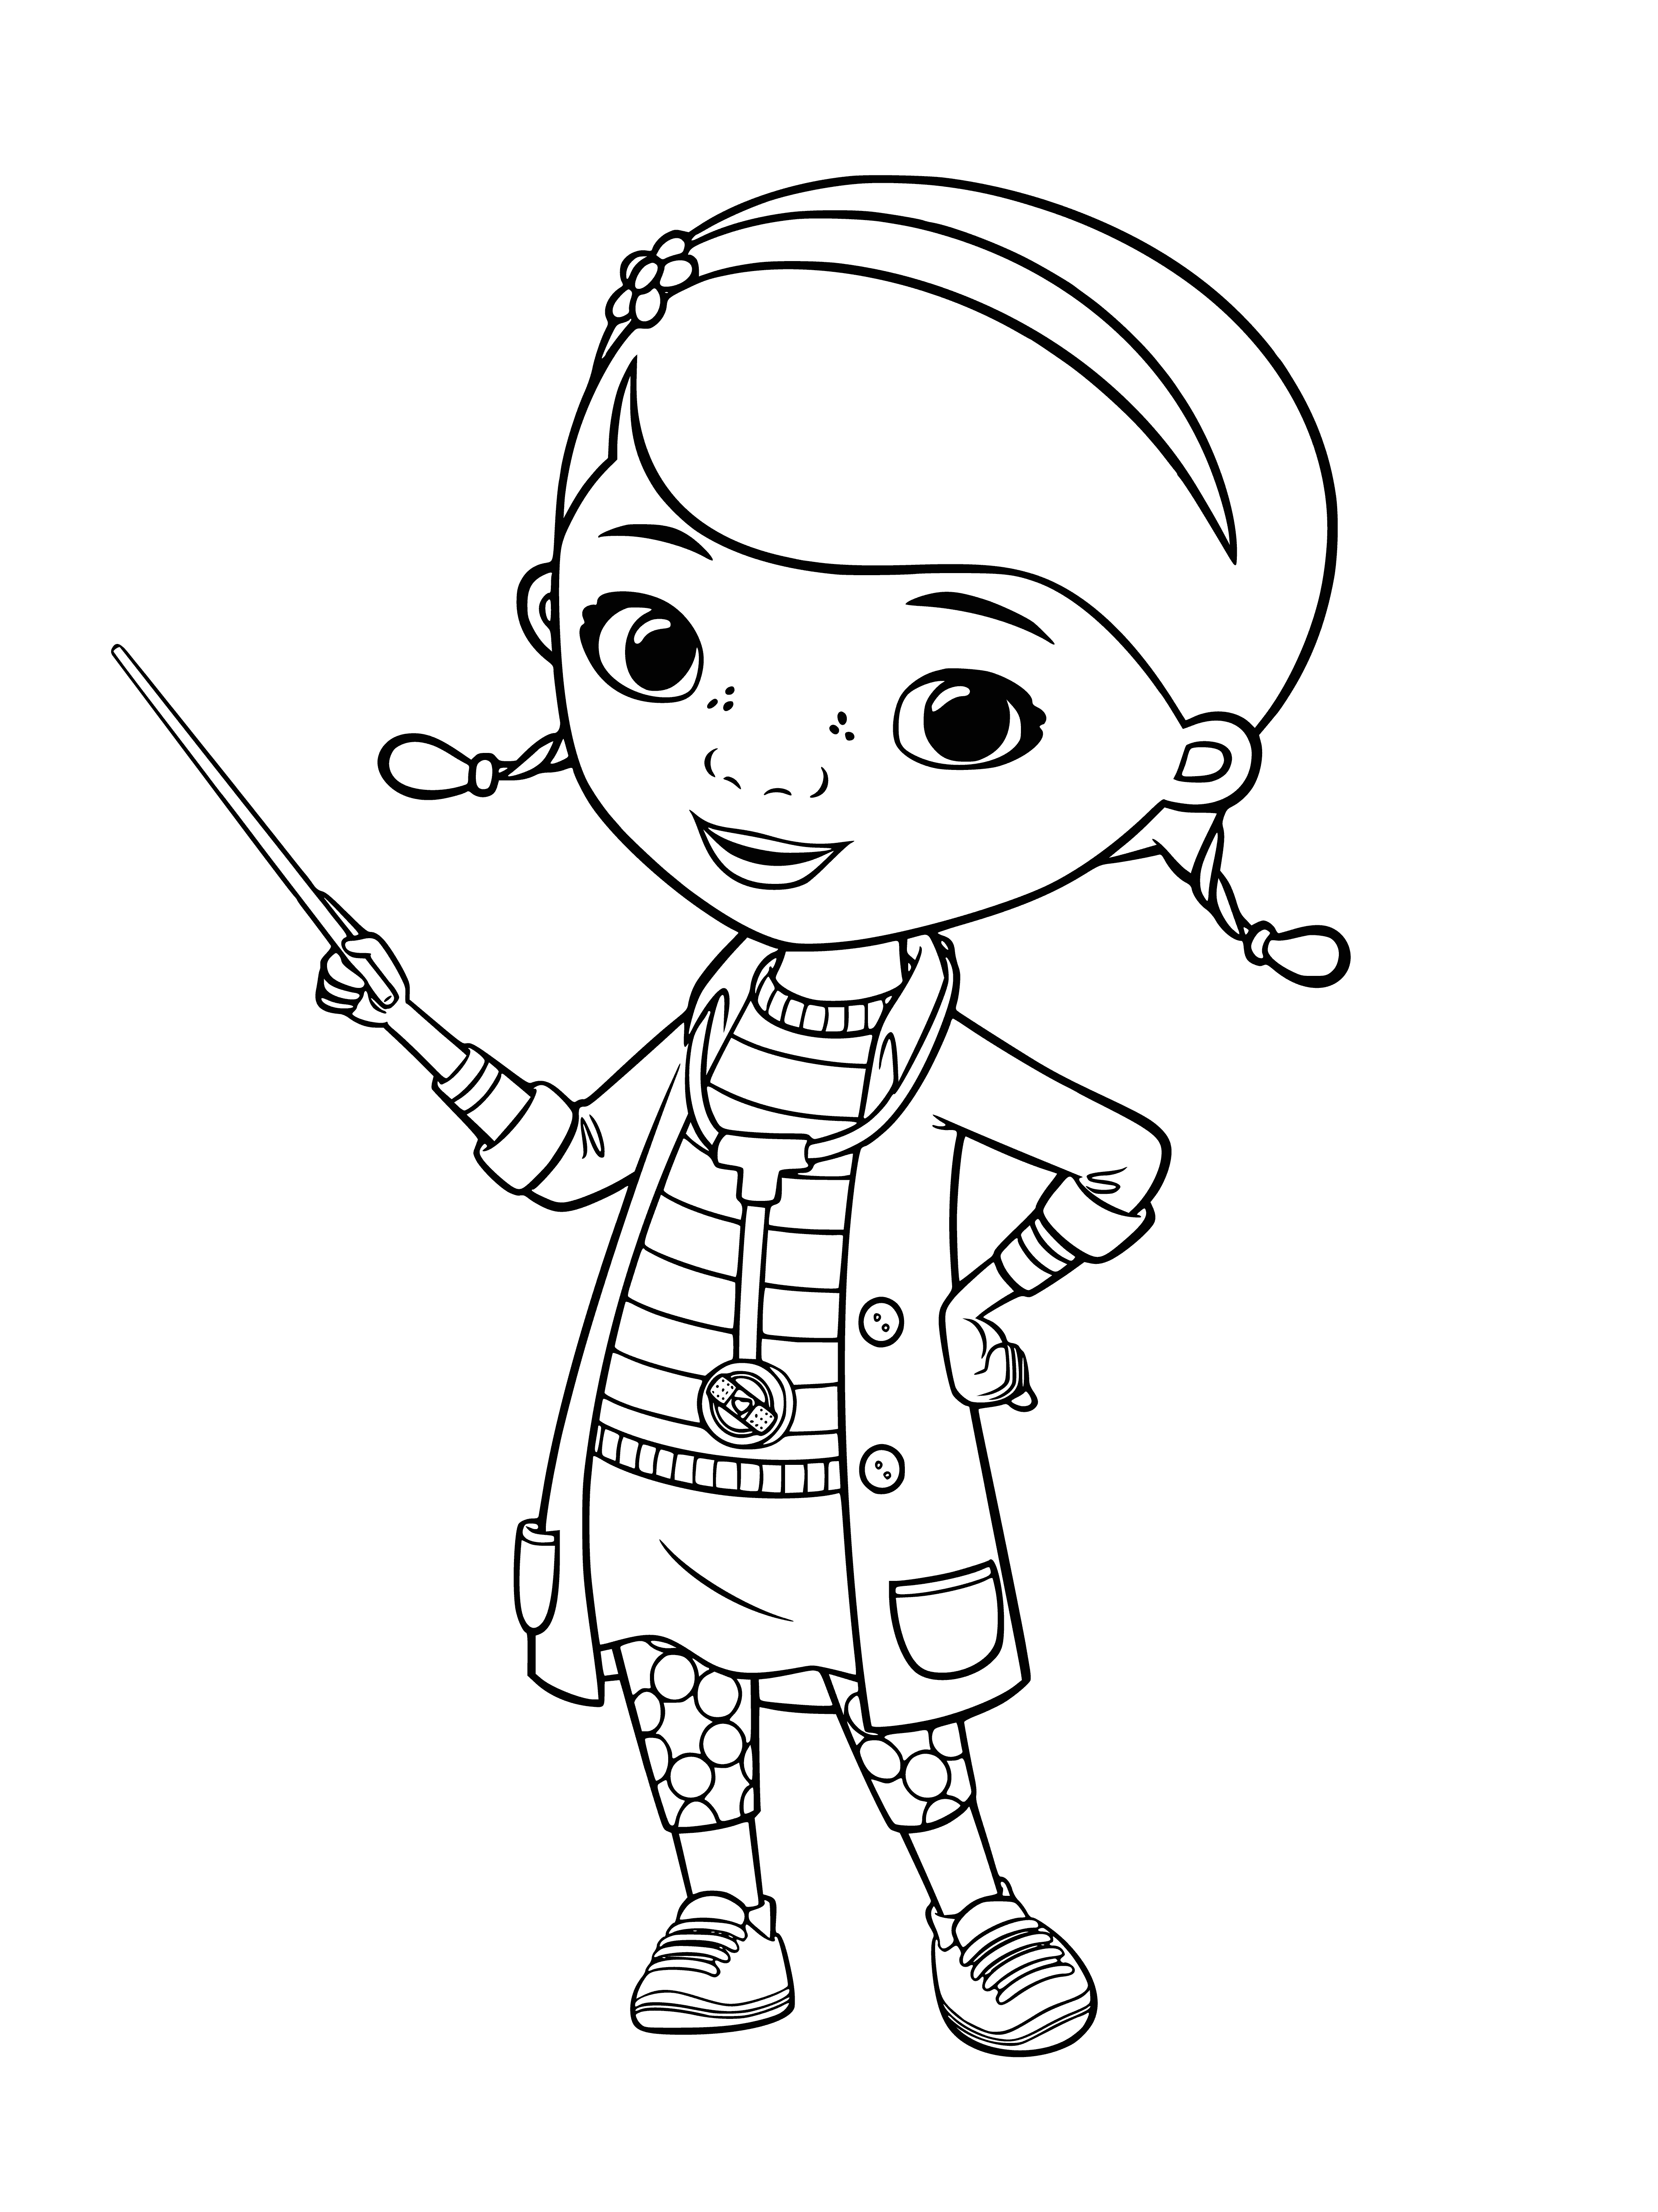 coloring page: Doc McStuffins is a doctor who helps toys. She wears a white coat and holds a toy while wearing a stethoscope. #DocMcStuffins